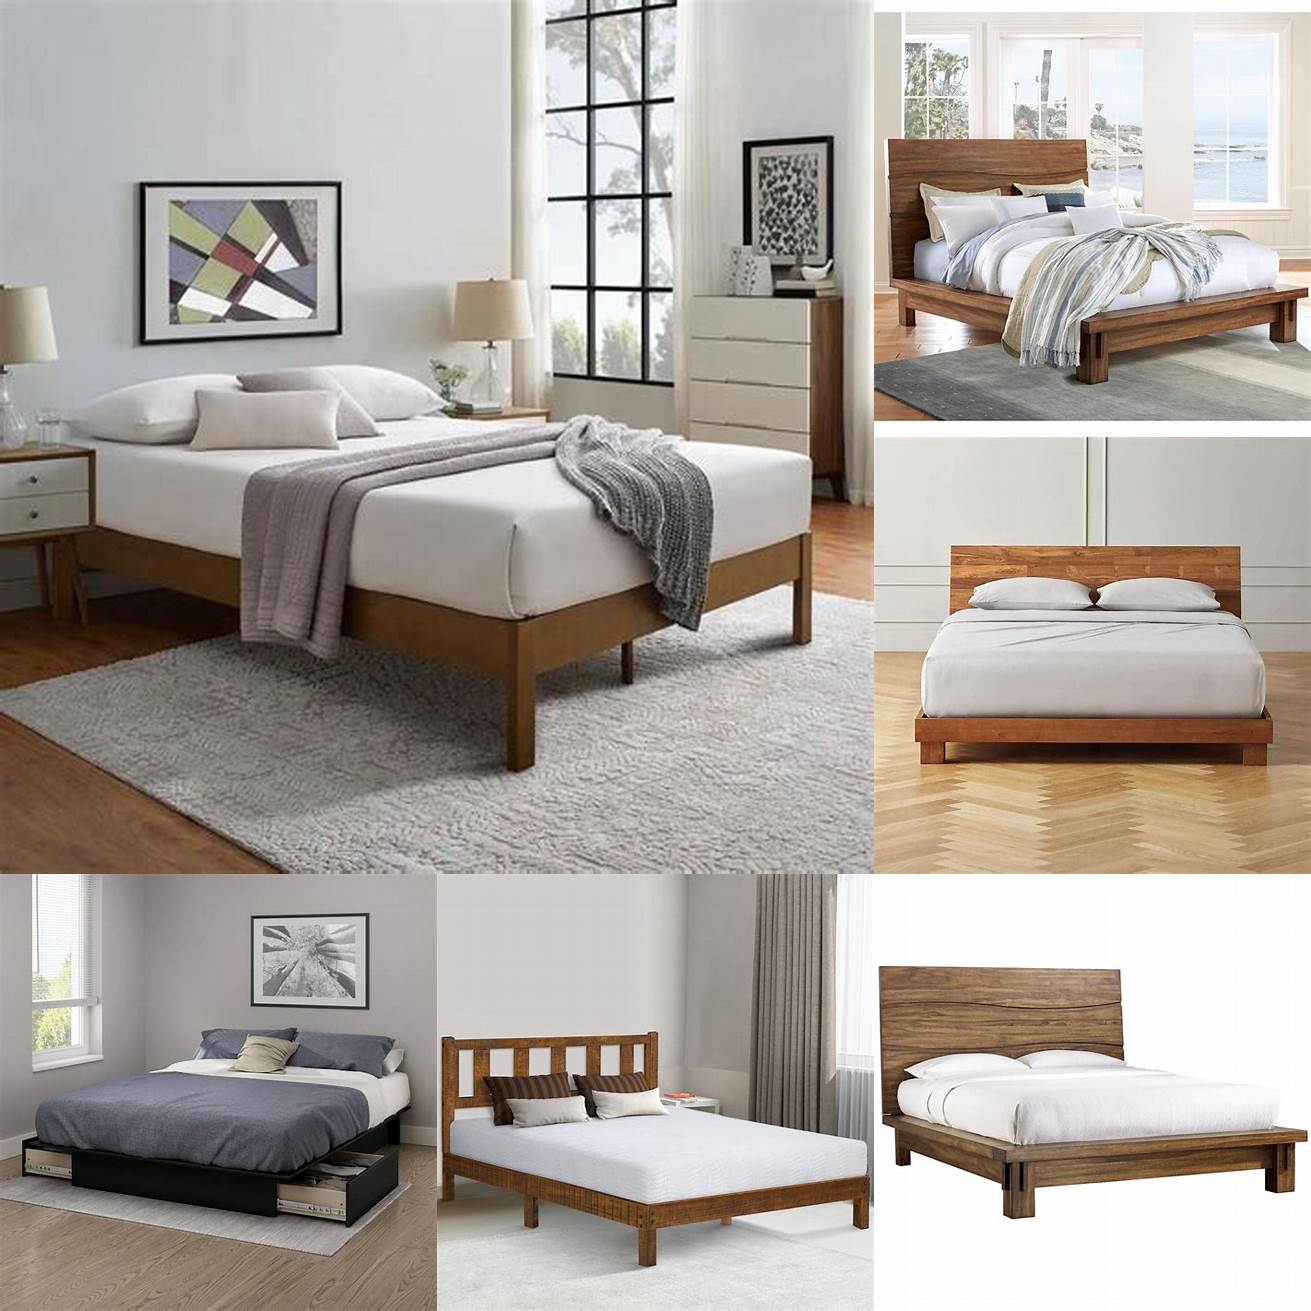 Sturdiness Platform beds are sturdier than traditional beds because they have a solid base that supports the mattress